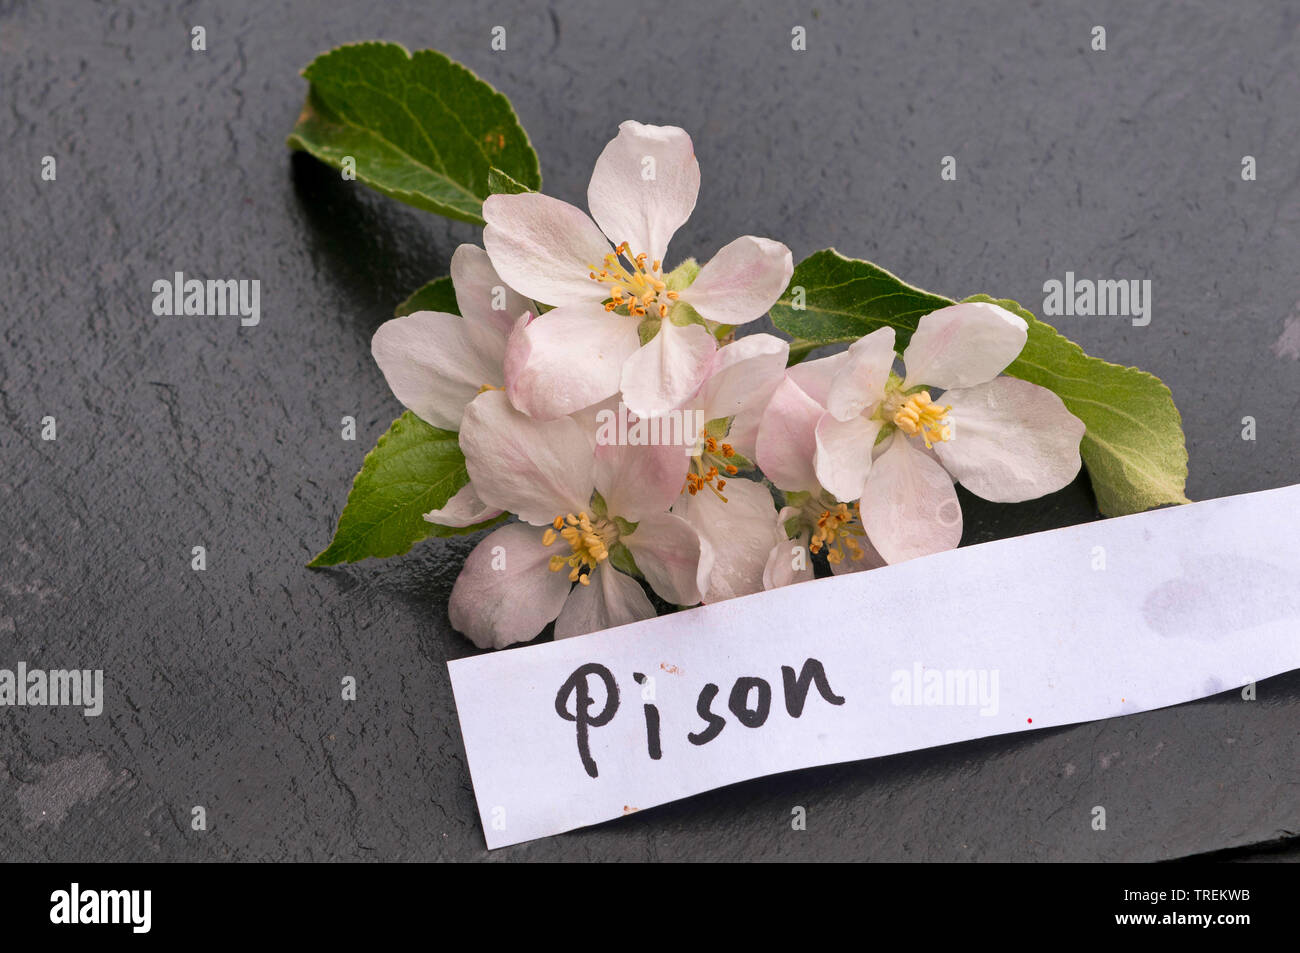 apple tree (Malus domestica 'Pison', Malus domestica Pison), apple flowers of an old cultivars with etiquette, Pison, Germany Stock Photo